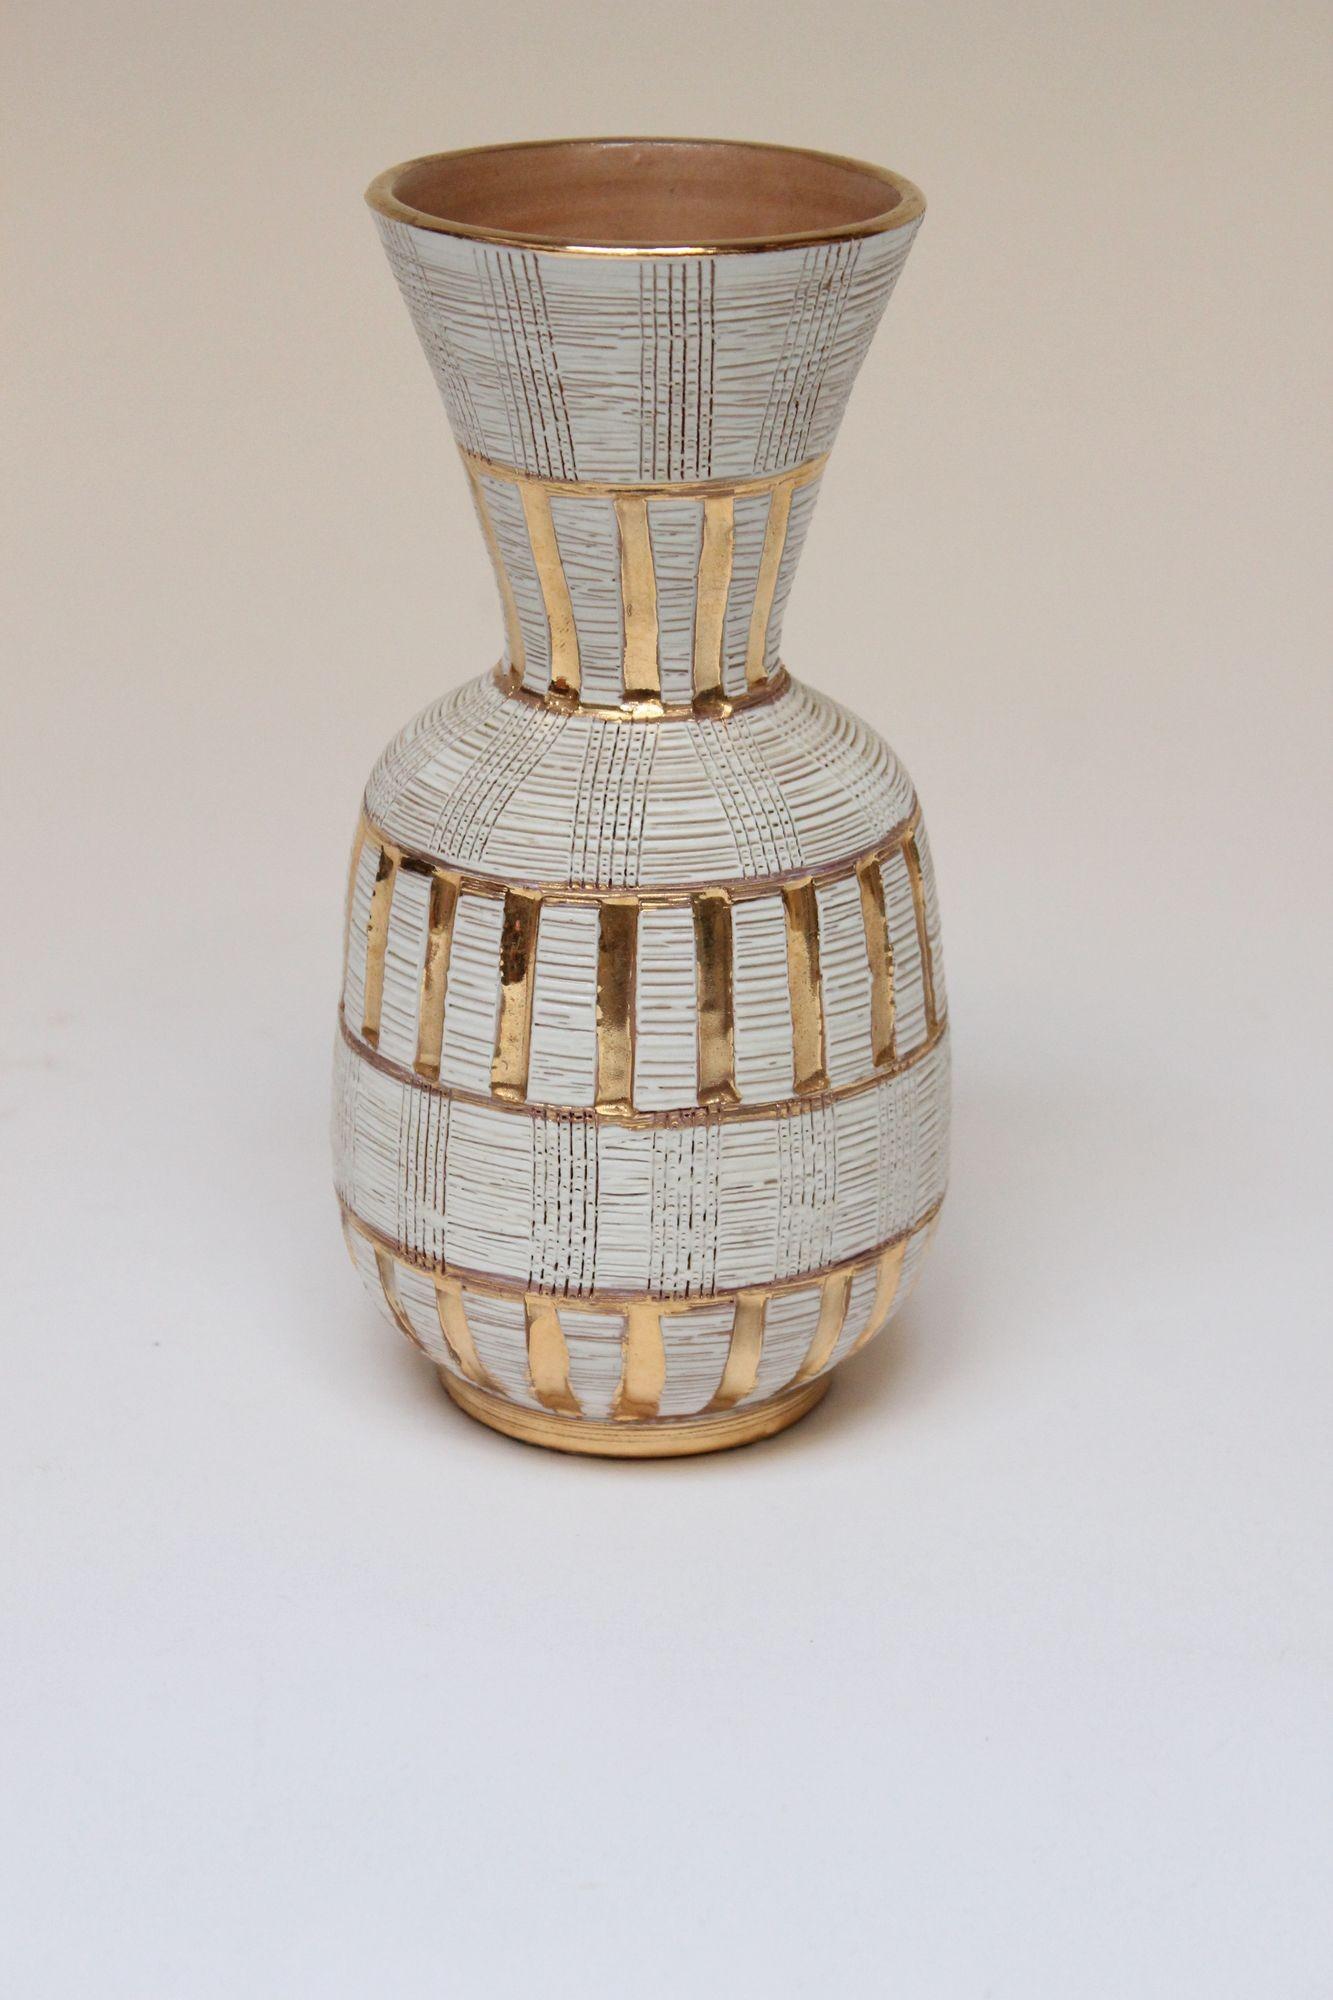 Glamorous vintage ceramic vase with incised design and hand-painted gold accents designed by Aldo Londi for Bitossi (ca. 1950s, ltaly).
The etched sgraffito linear pattern reveals the beige base under the matte white glaze.
Excellent, vintage